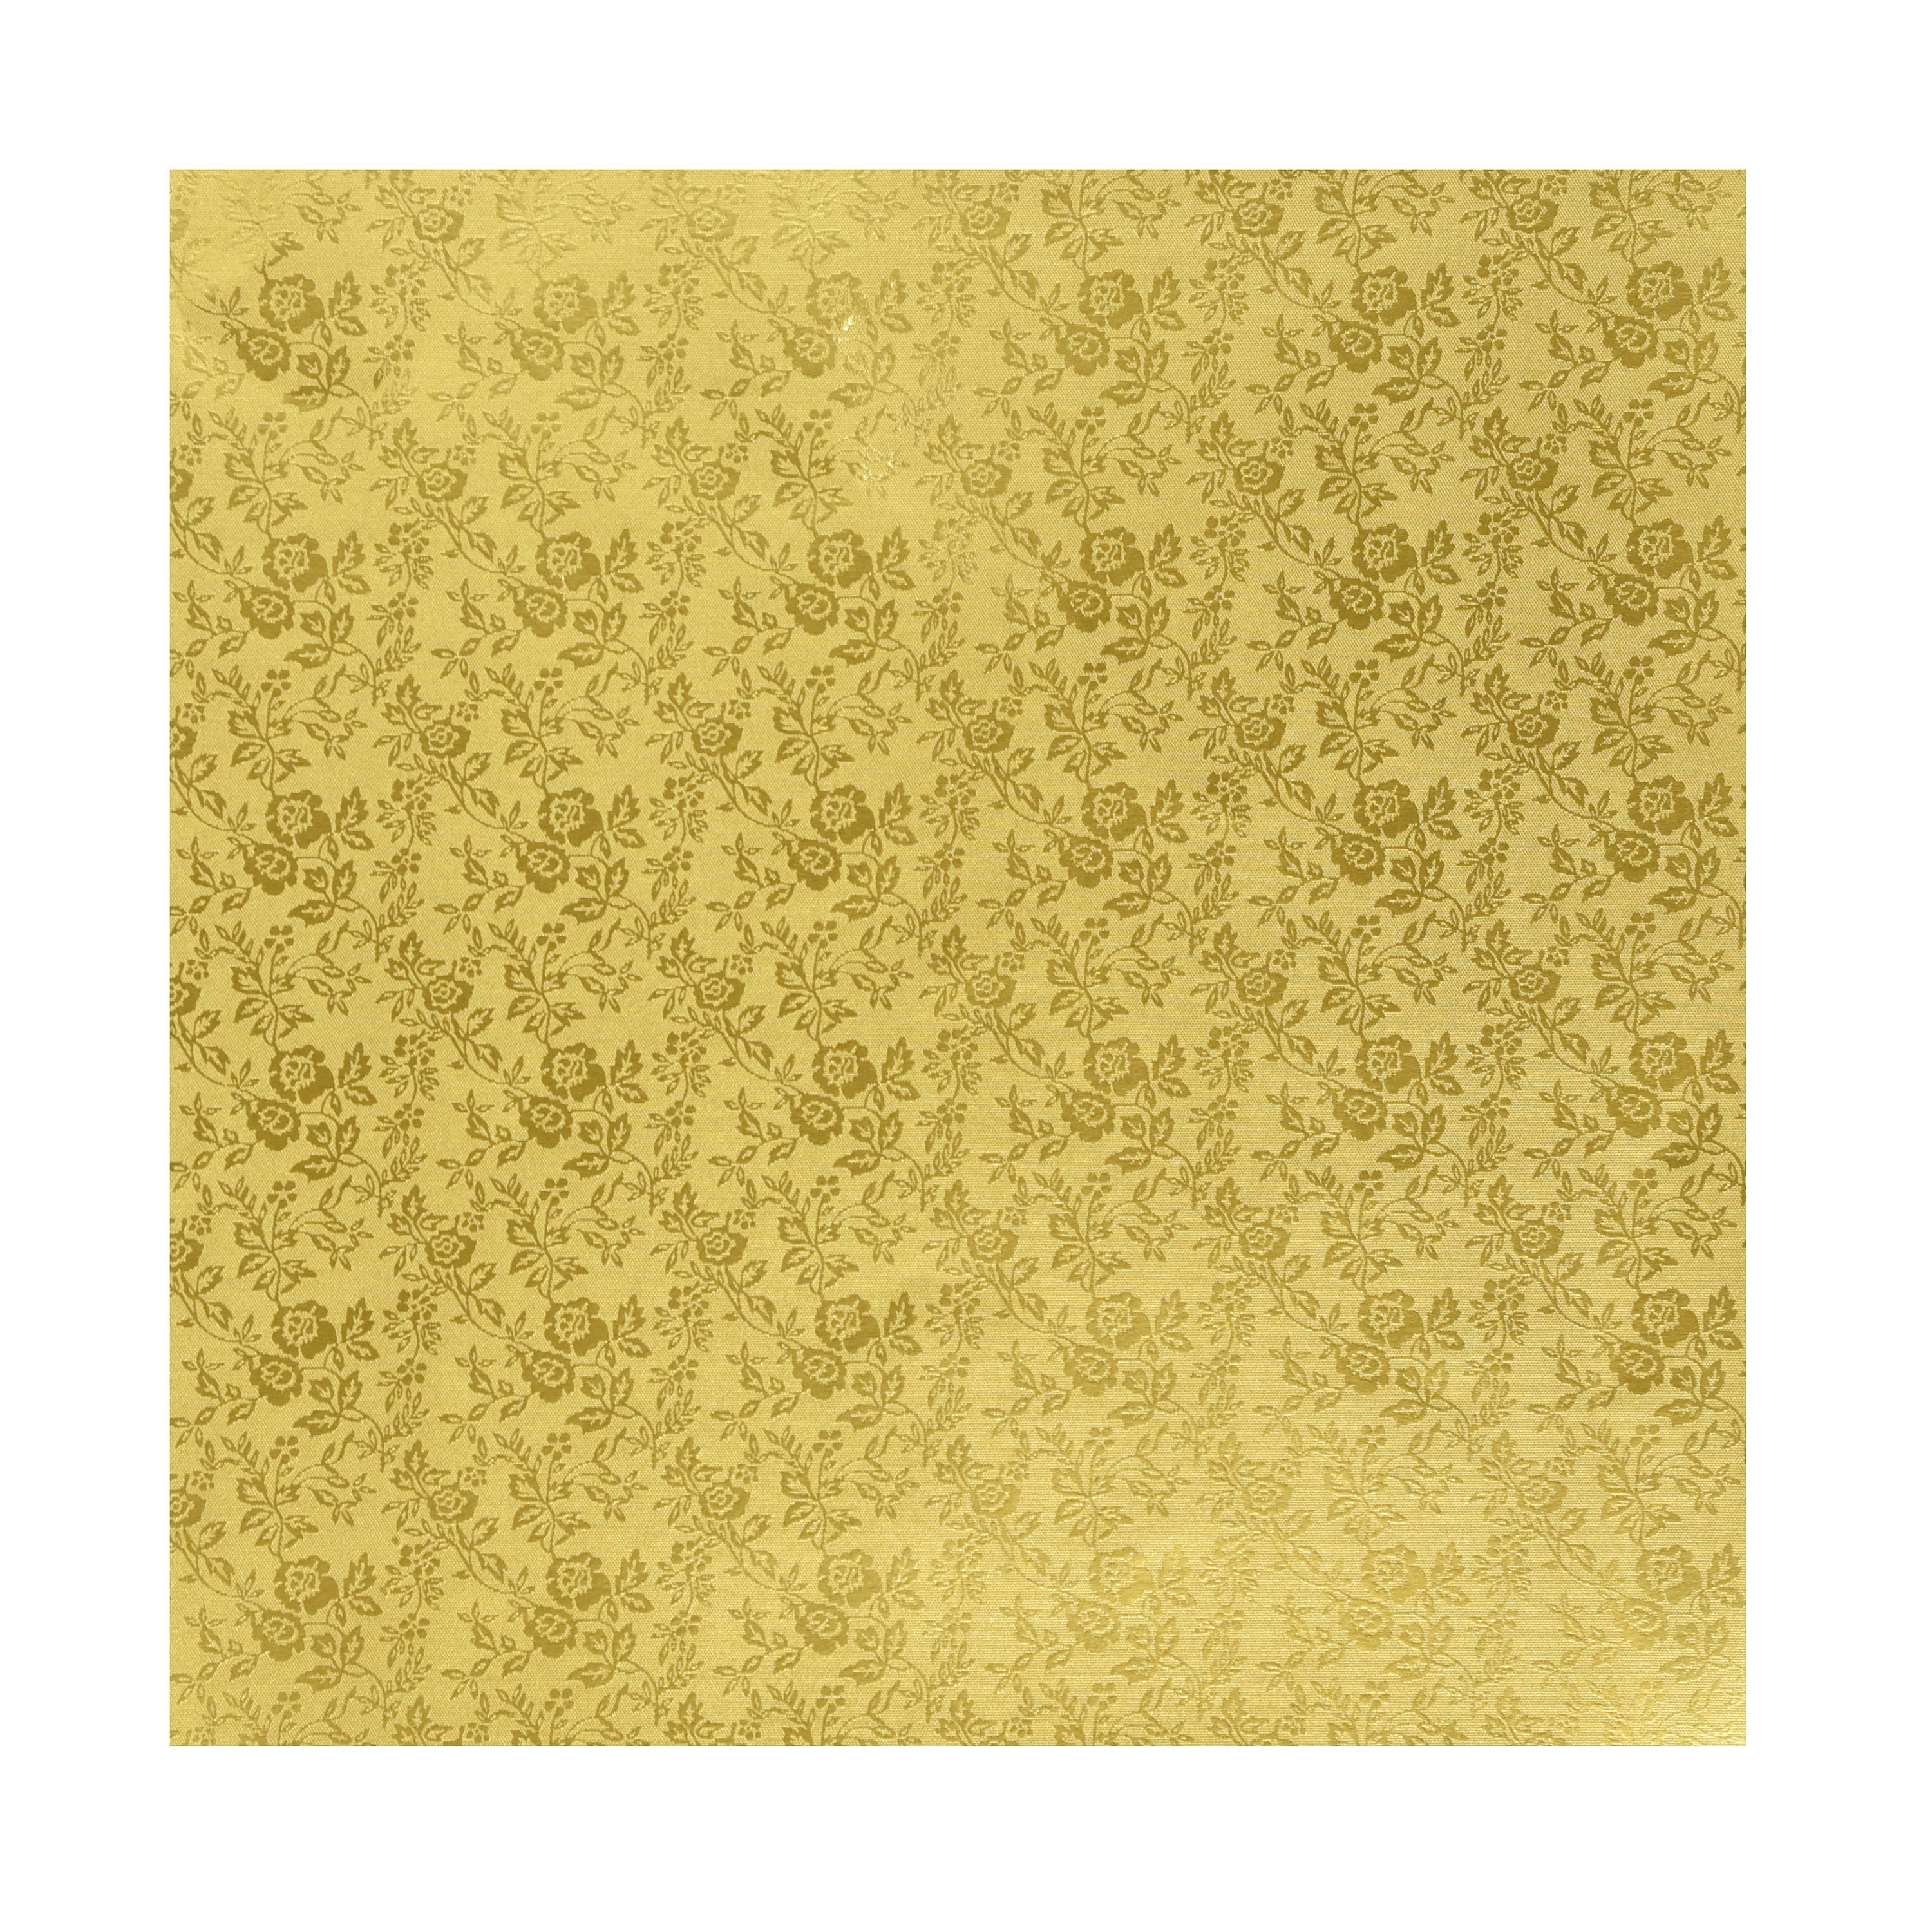 12 Sheets 12x12 Gold Pearl Coated Origami Card stock 125GSM Ideal for Card Making, Scrapbooking, Invitations & Paper Crafts